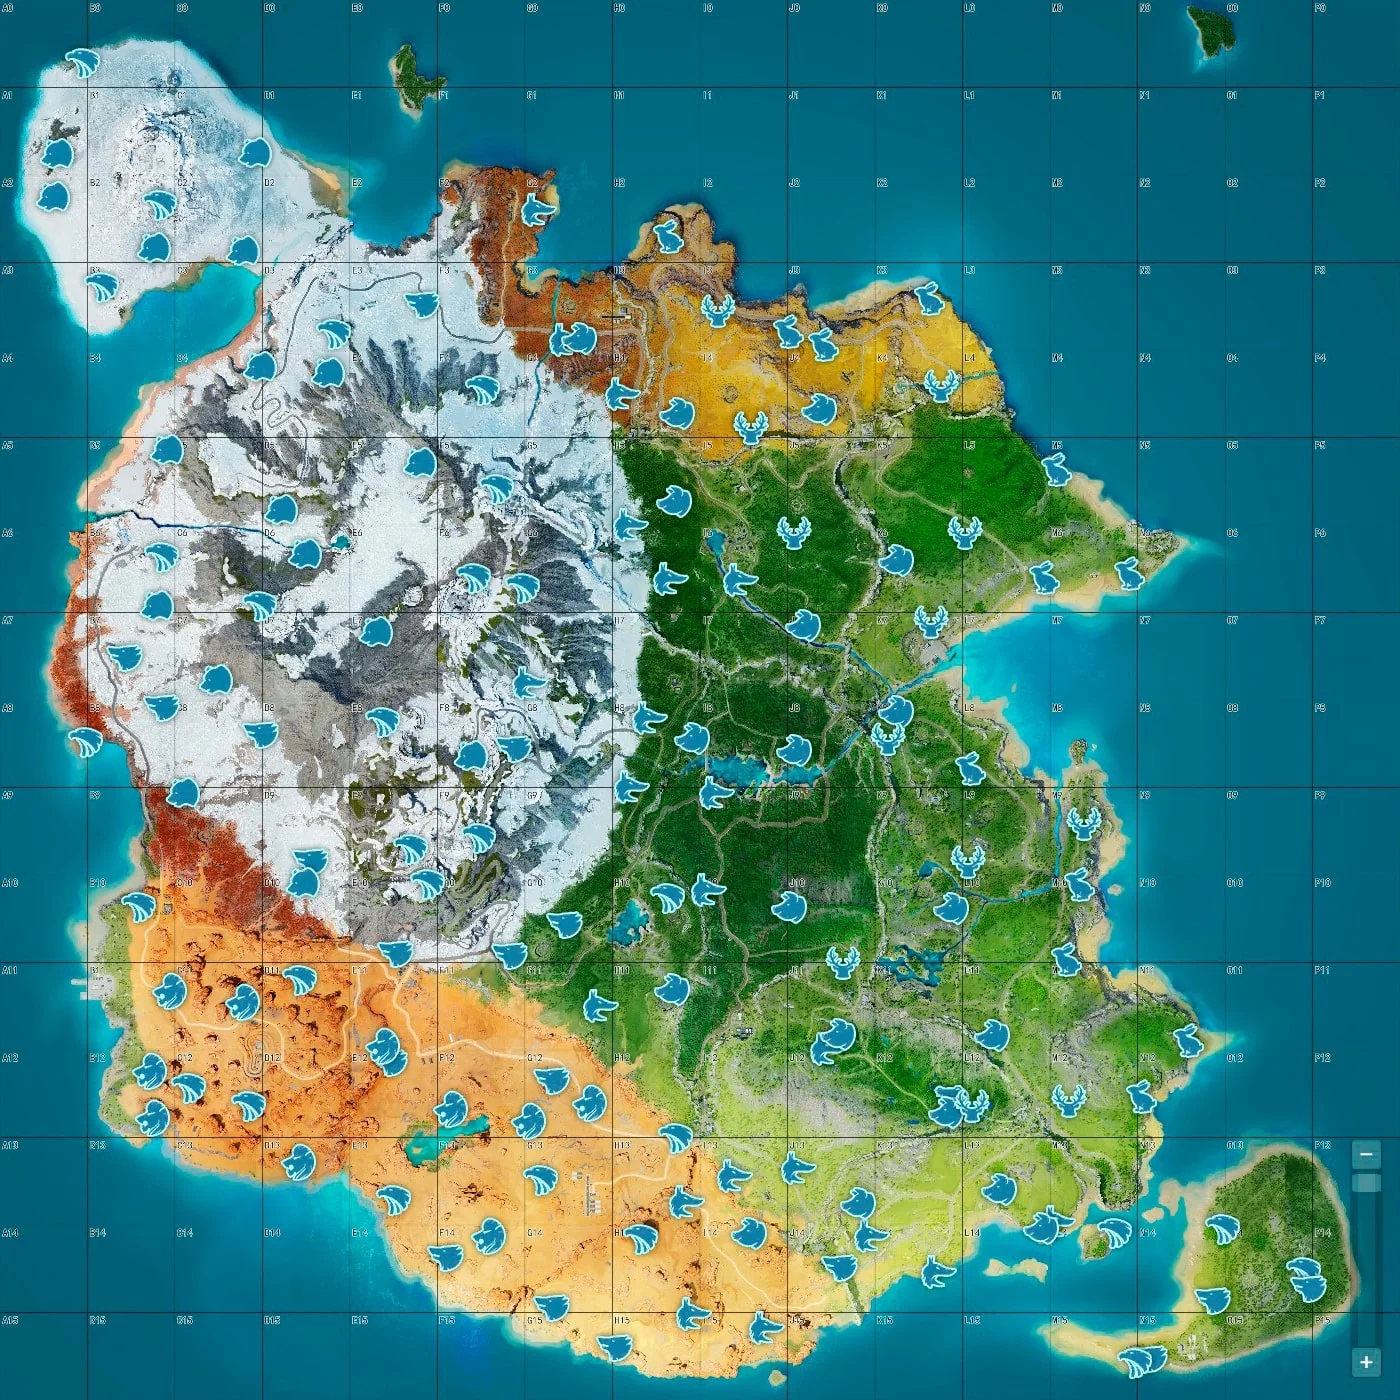 Full map with all filters and maximum resolution.